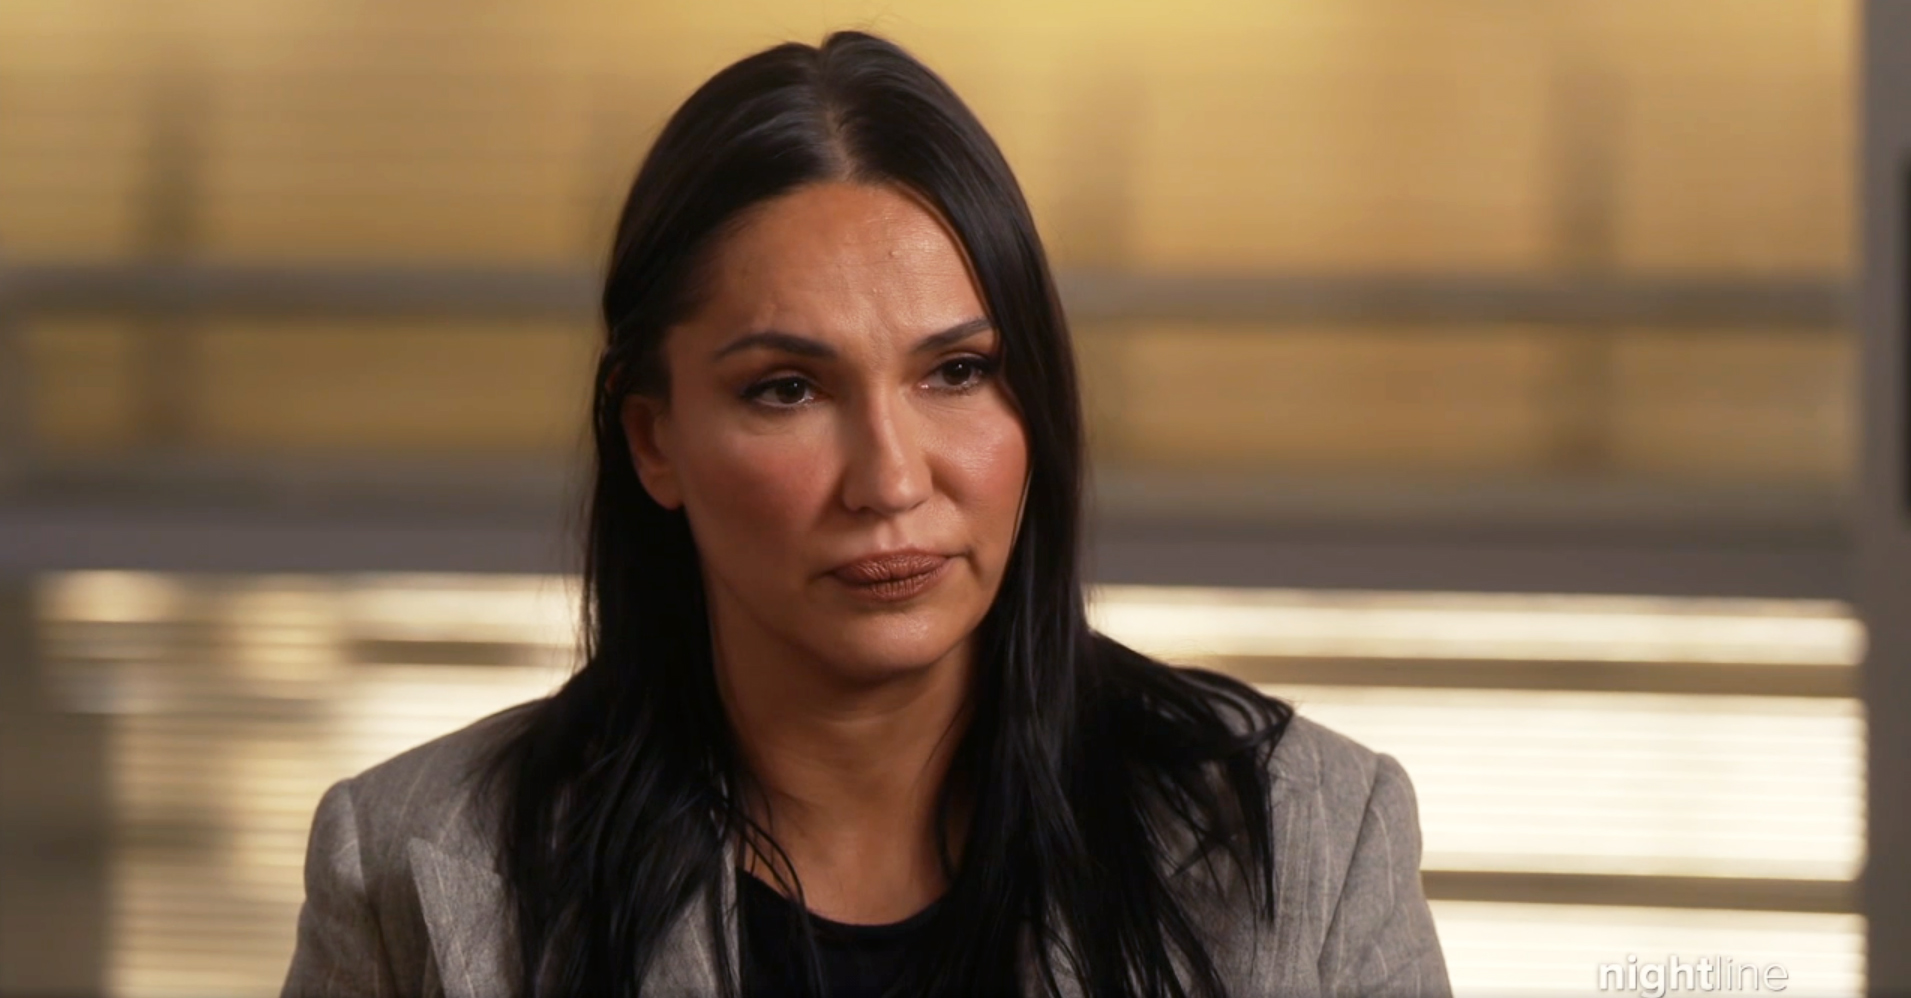 PHOTO: Evgeniya Chernyshova talks to "Nightline" about coming forward with her charges against Harvey Weinstein, who she said sexually assaulted her in 2013.